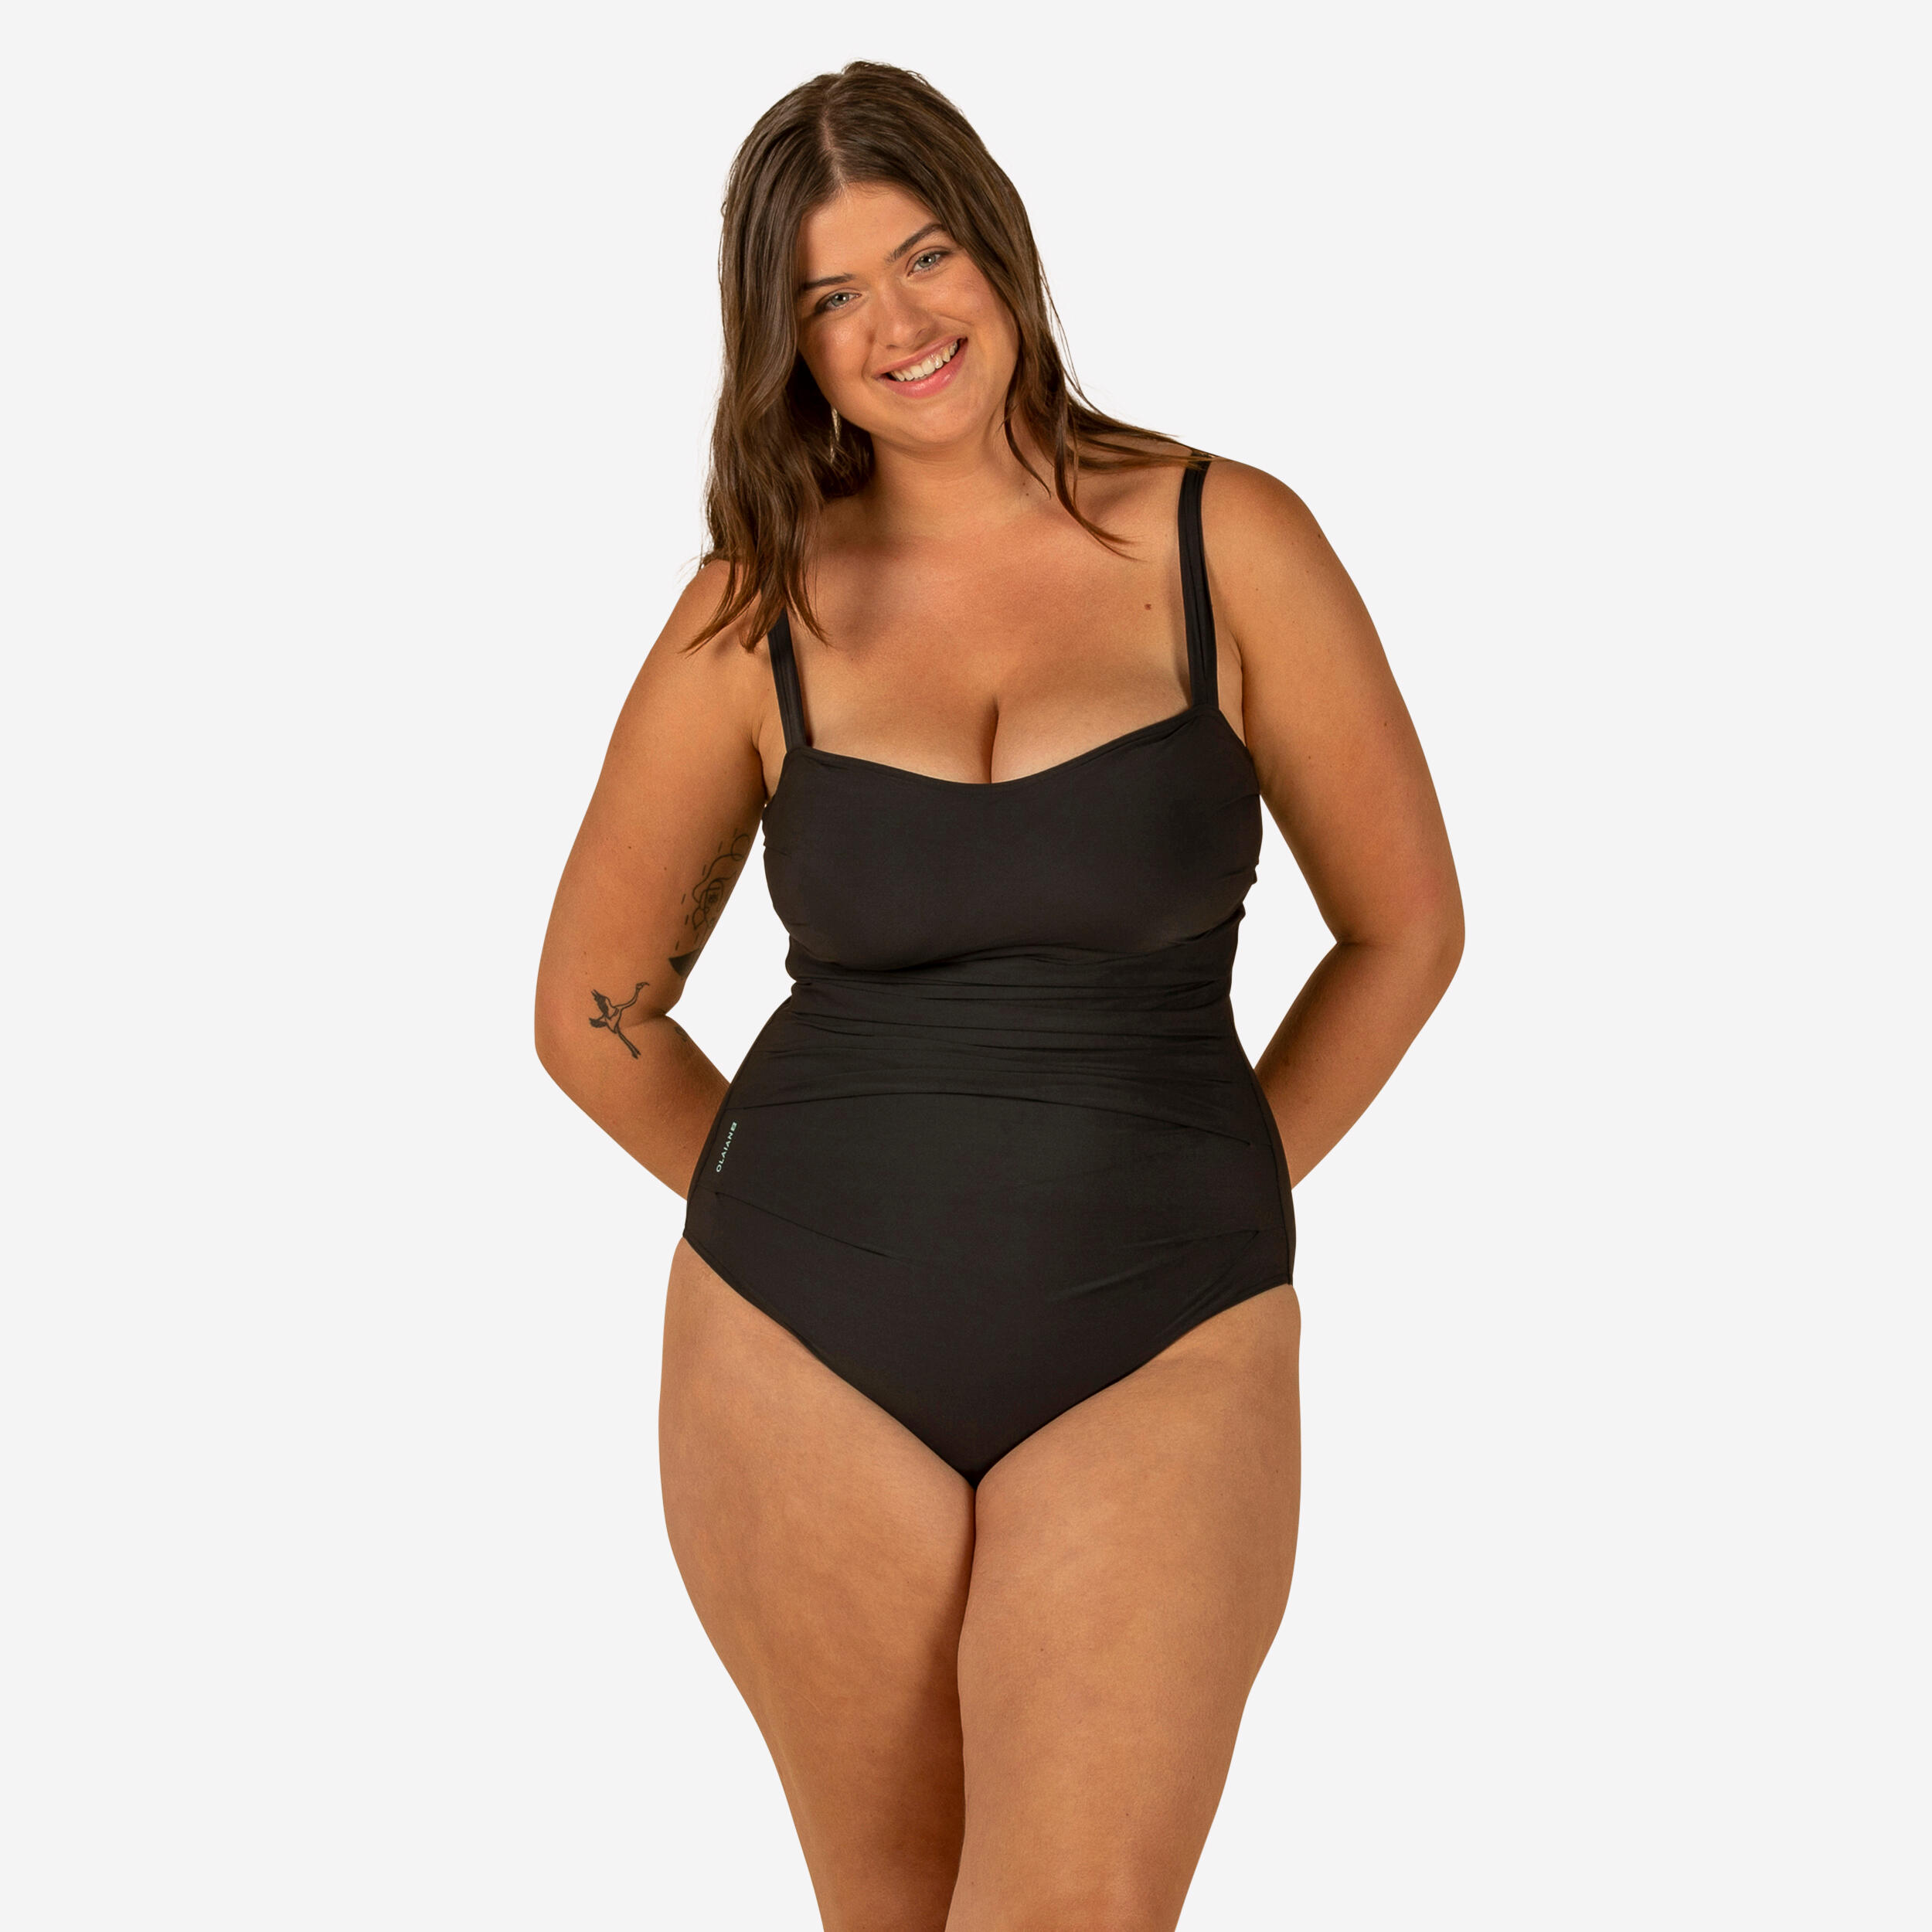 OLAIAN Dora Women's One-Piece Body-Sculpting Swimsuit with Flat Stomach Effect - Black